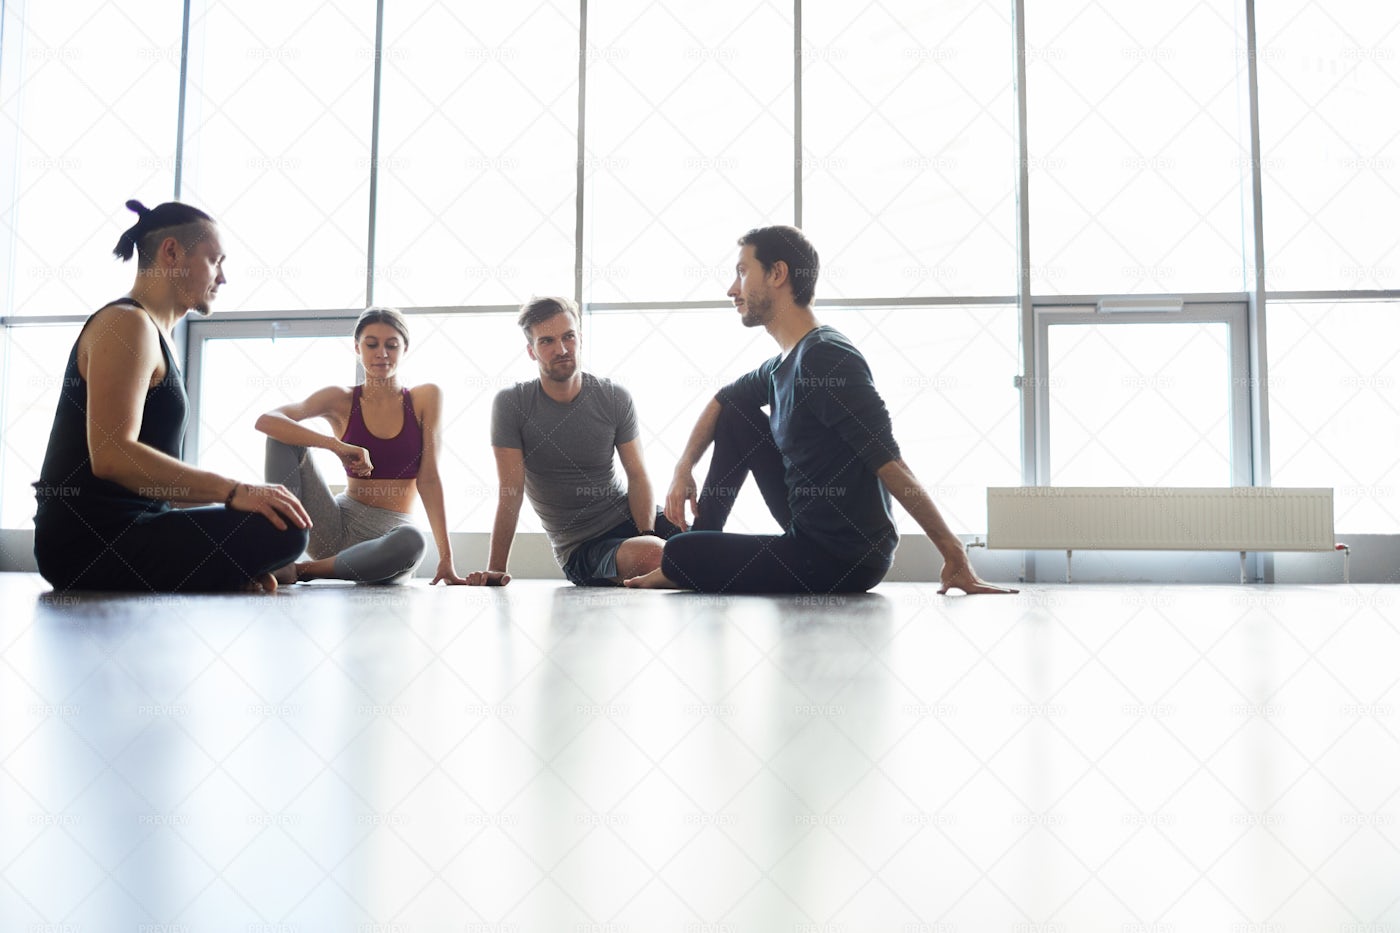 Planning Shared Yoga Practice: Stock Photos